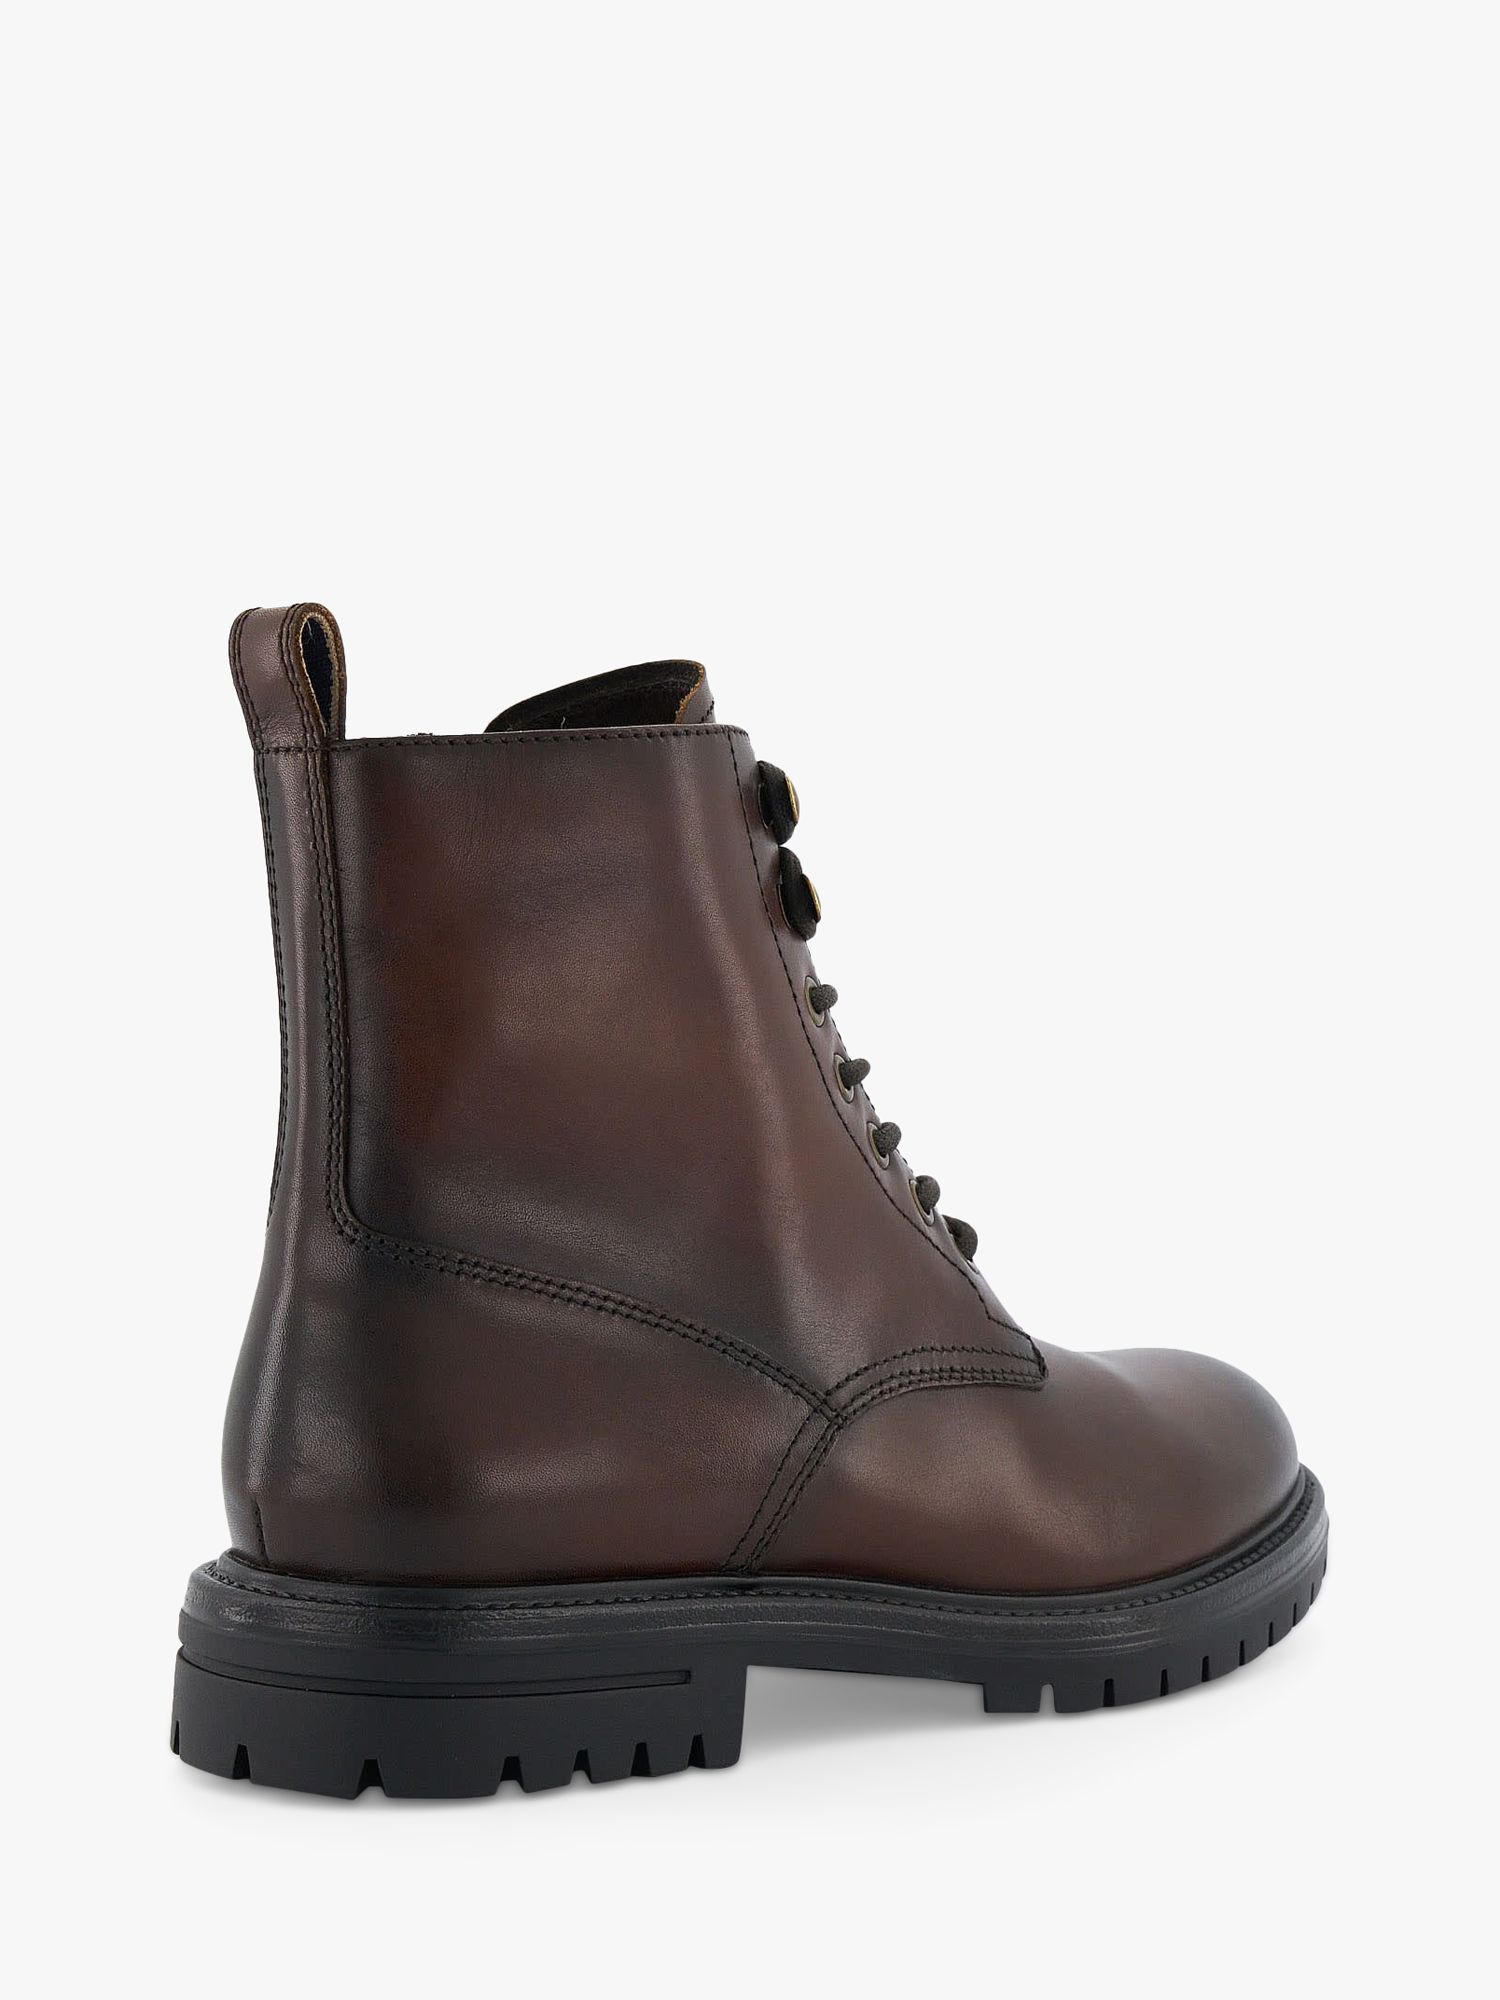 Dune Concepts Leather Lace Up Boots, Brown at John Lewis & Partners